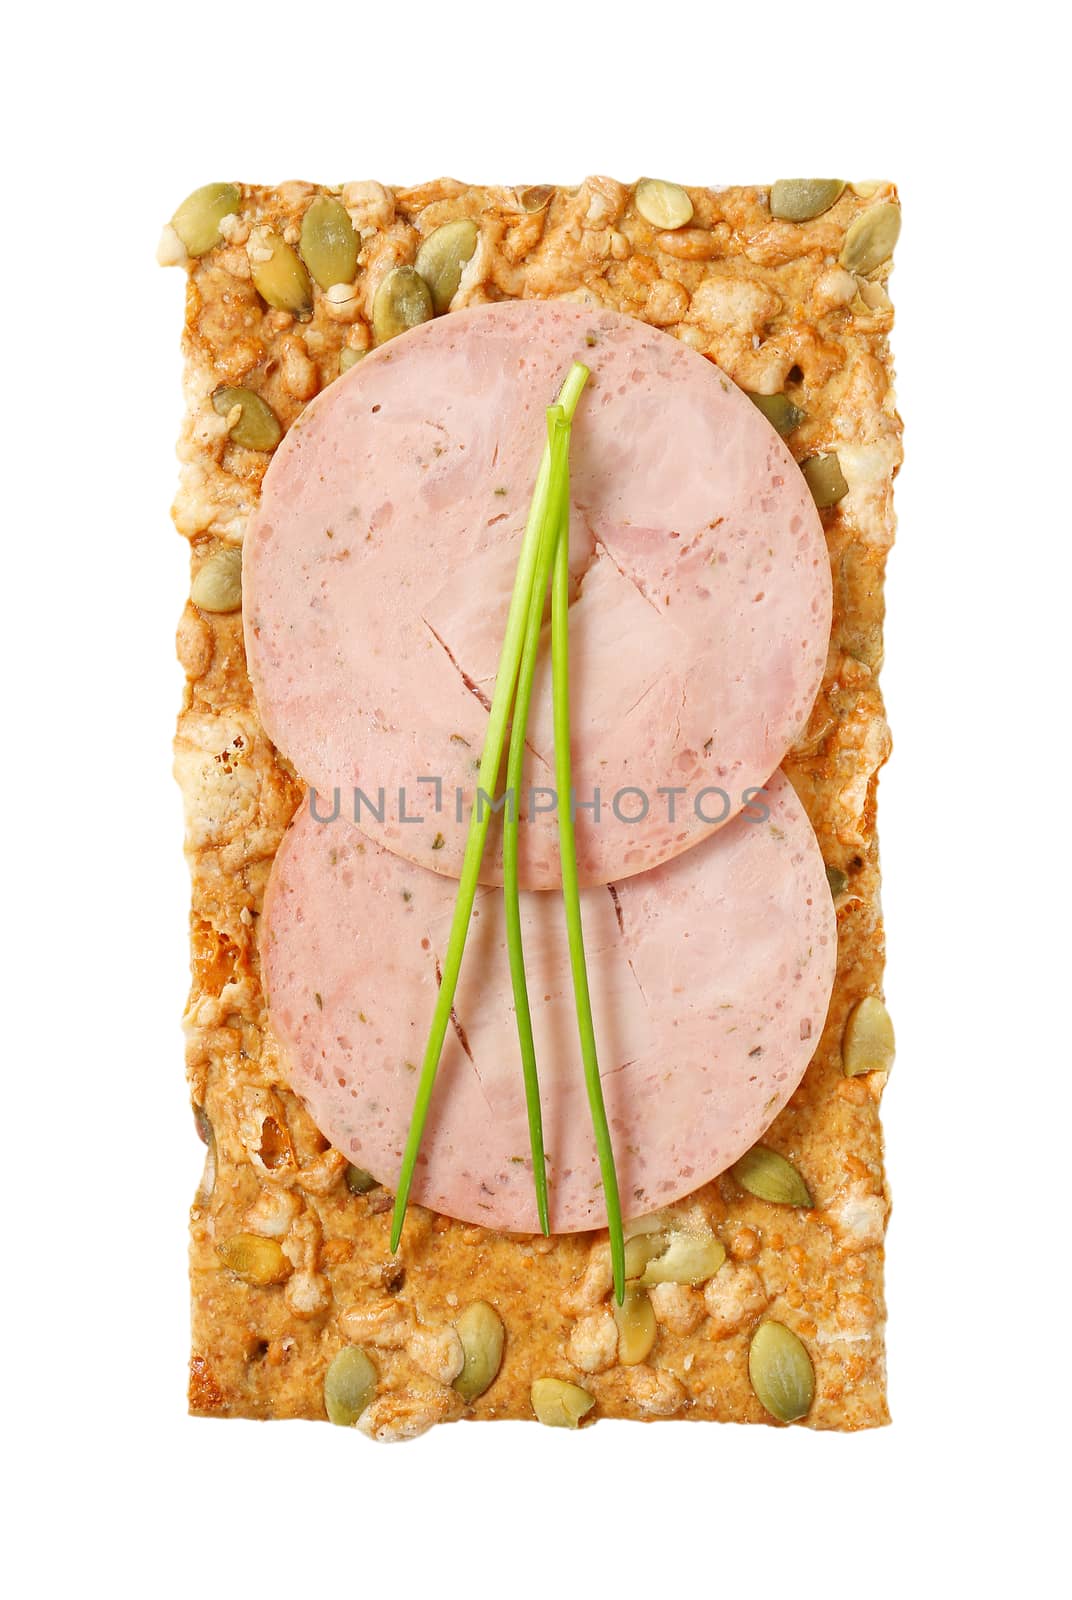 pumpkin seed cracker with soft sausage slices by Digifoodstock